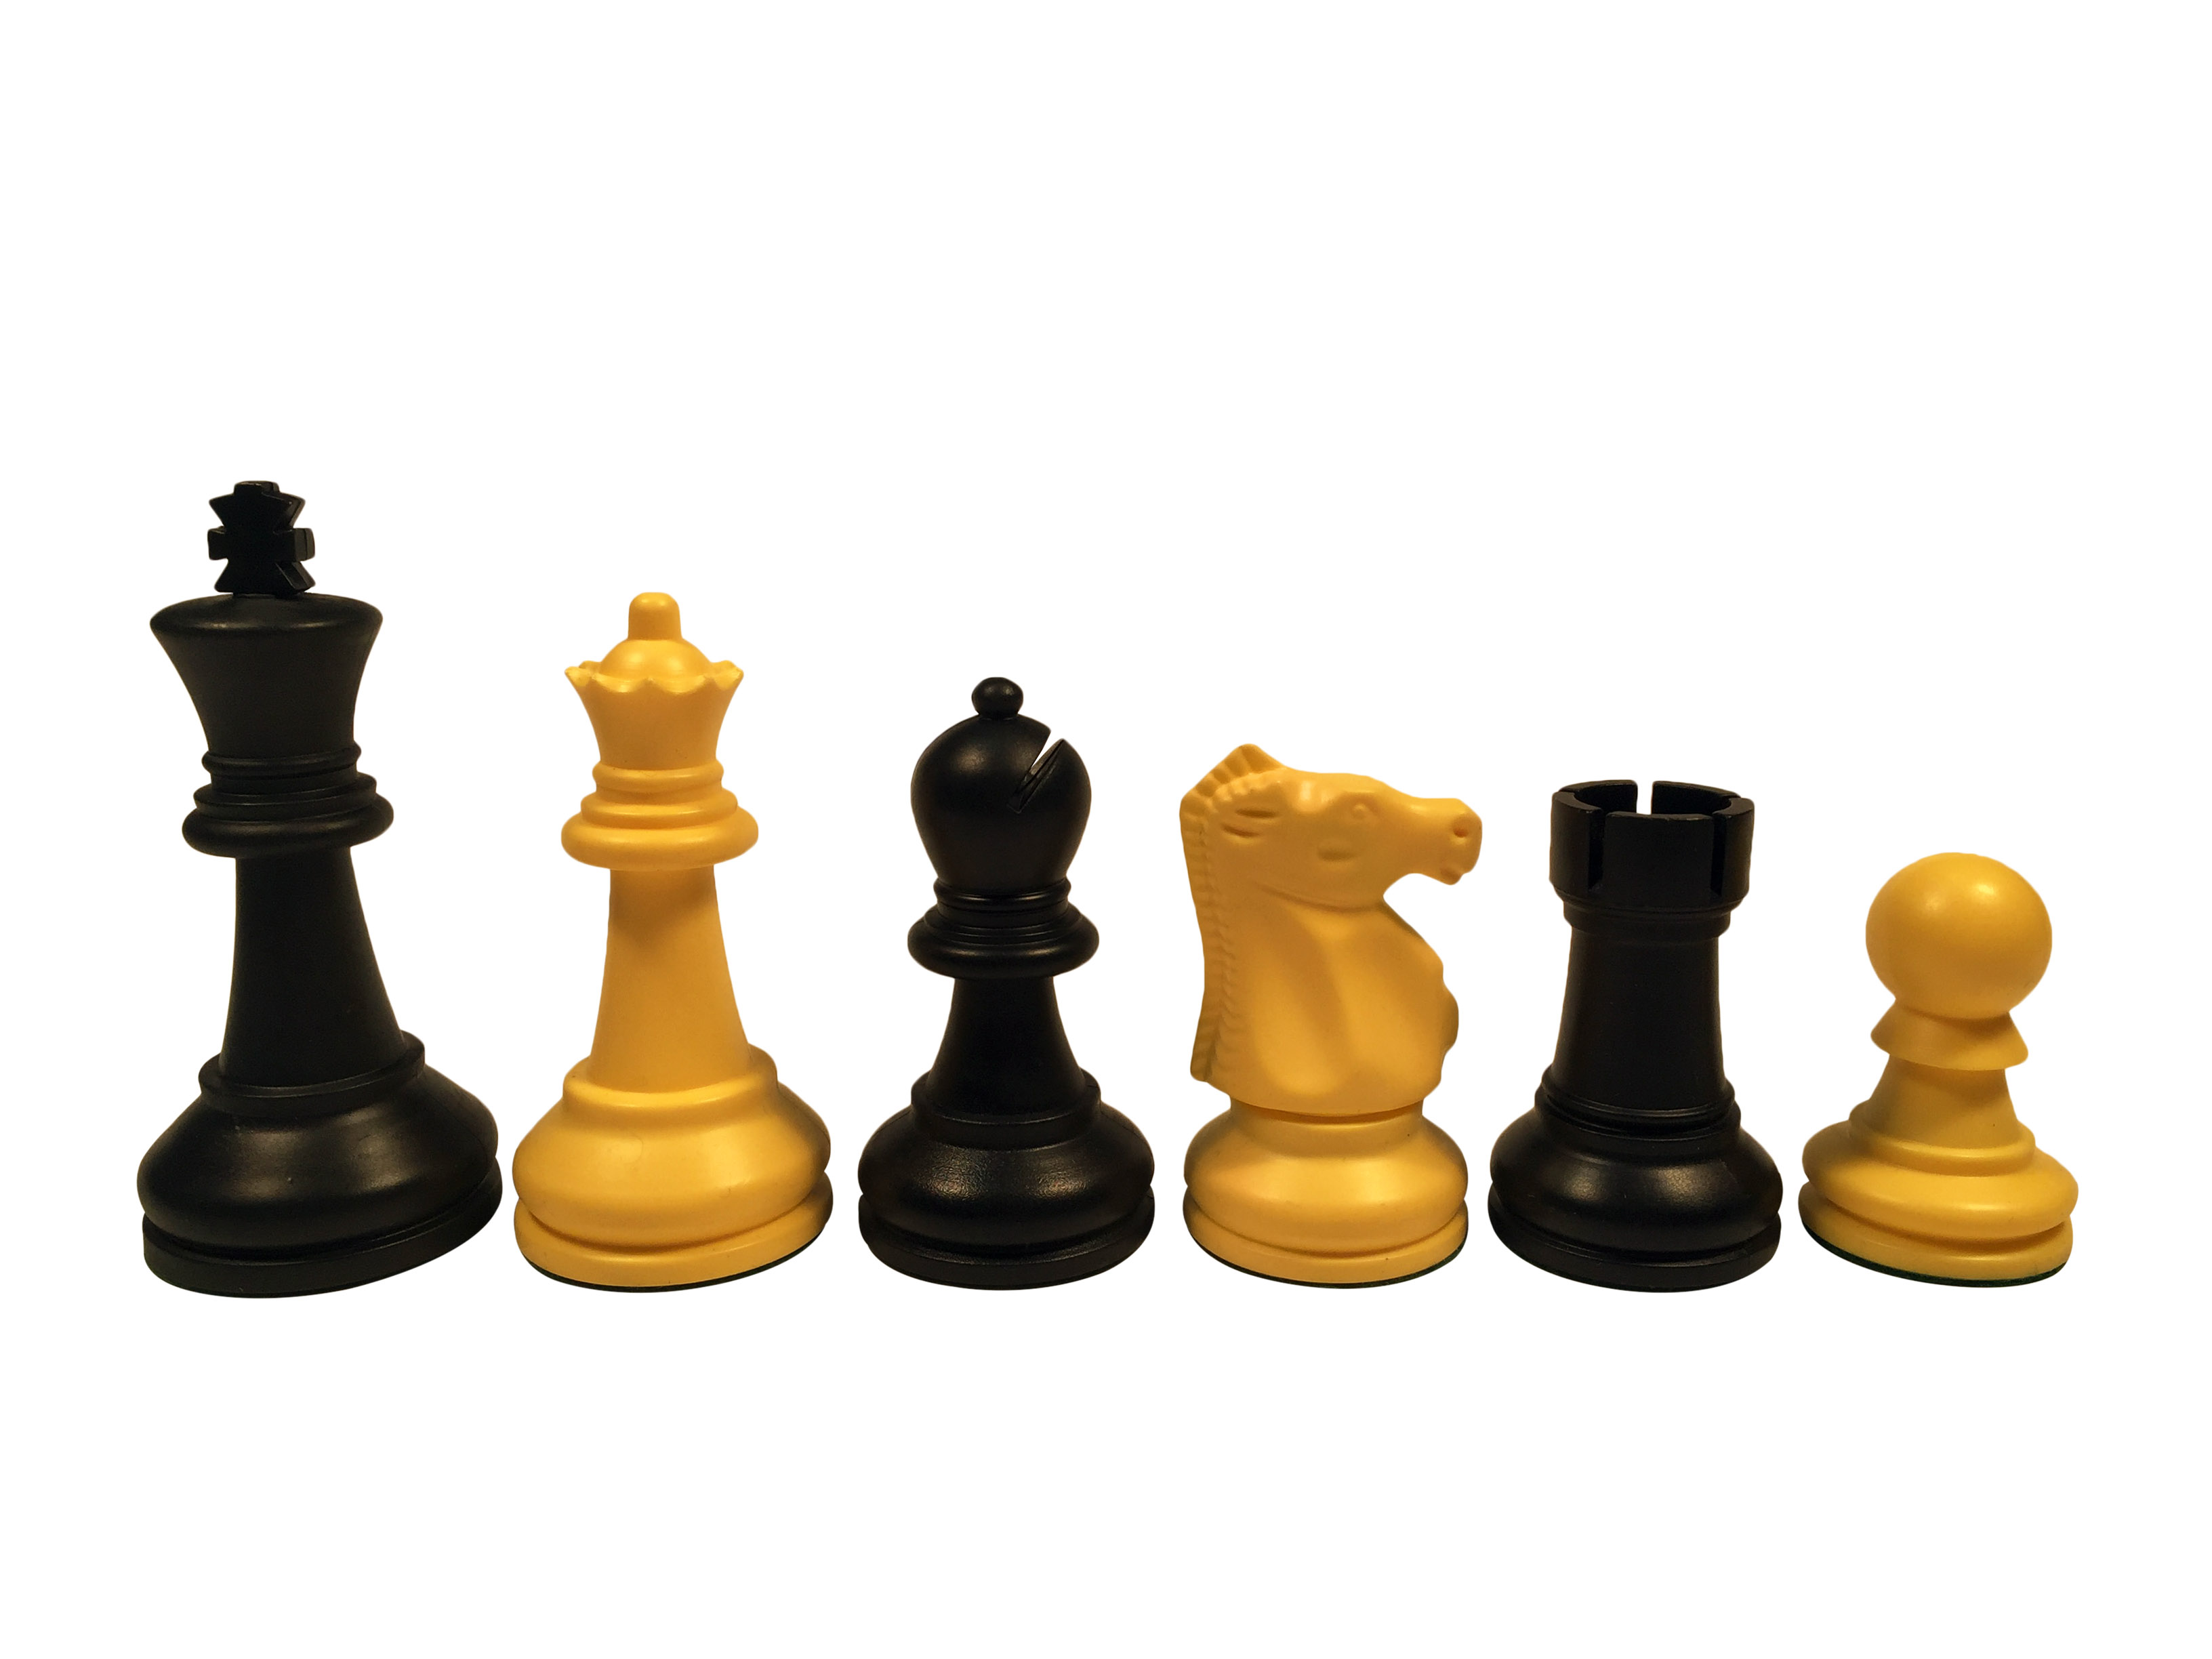 Standard Club Plastic Chess Set Black & Ivory Pieces with Vinyl Rollup  Board - Black